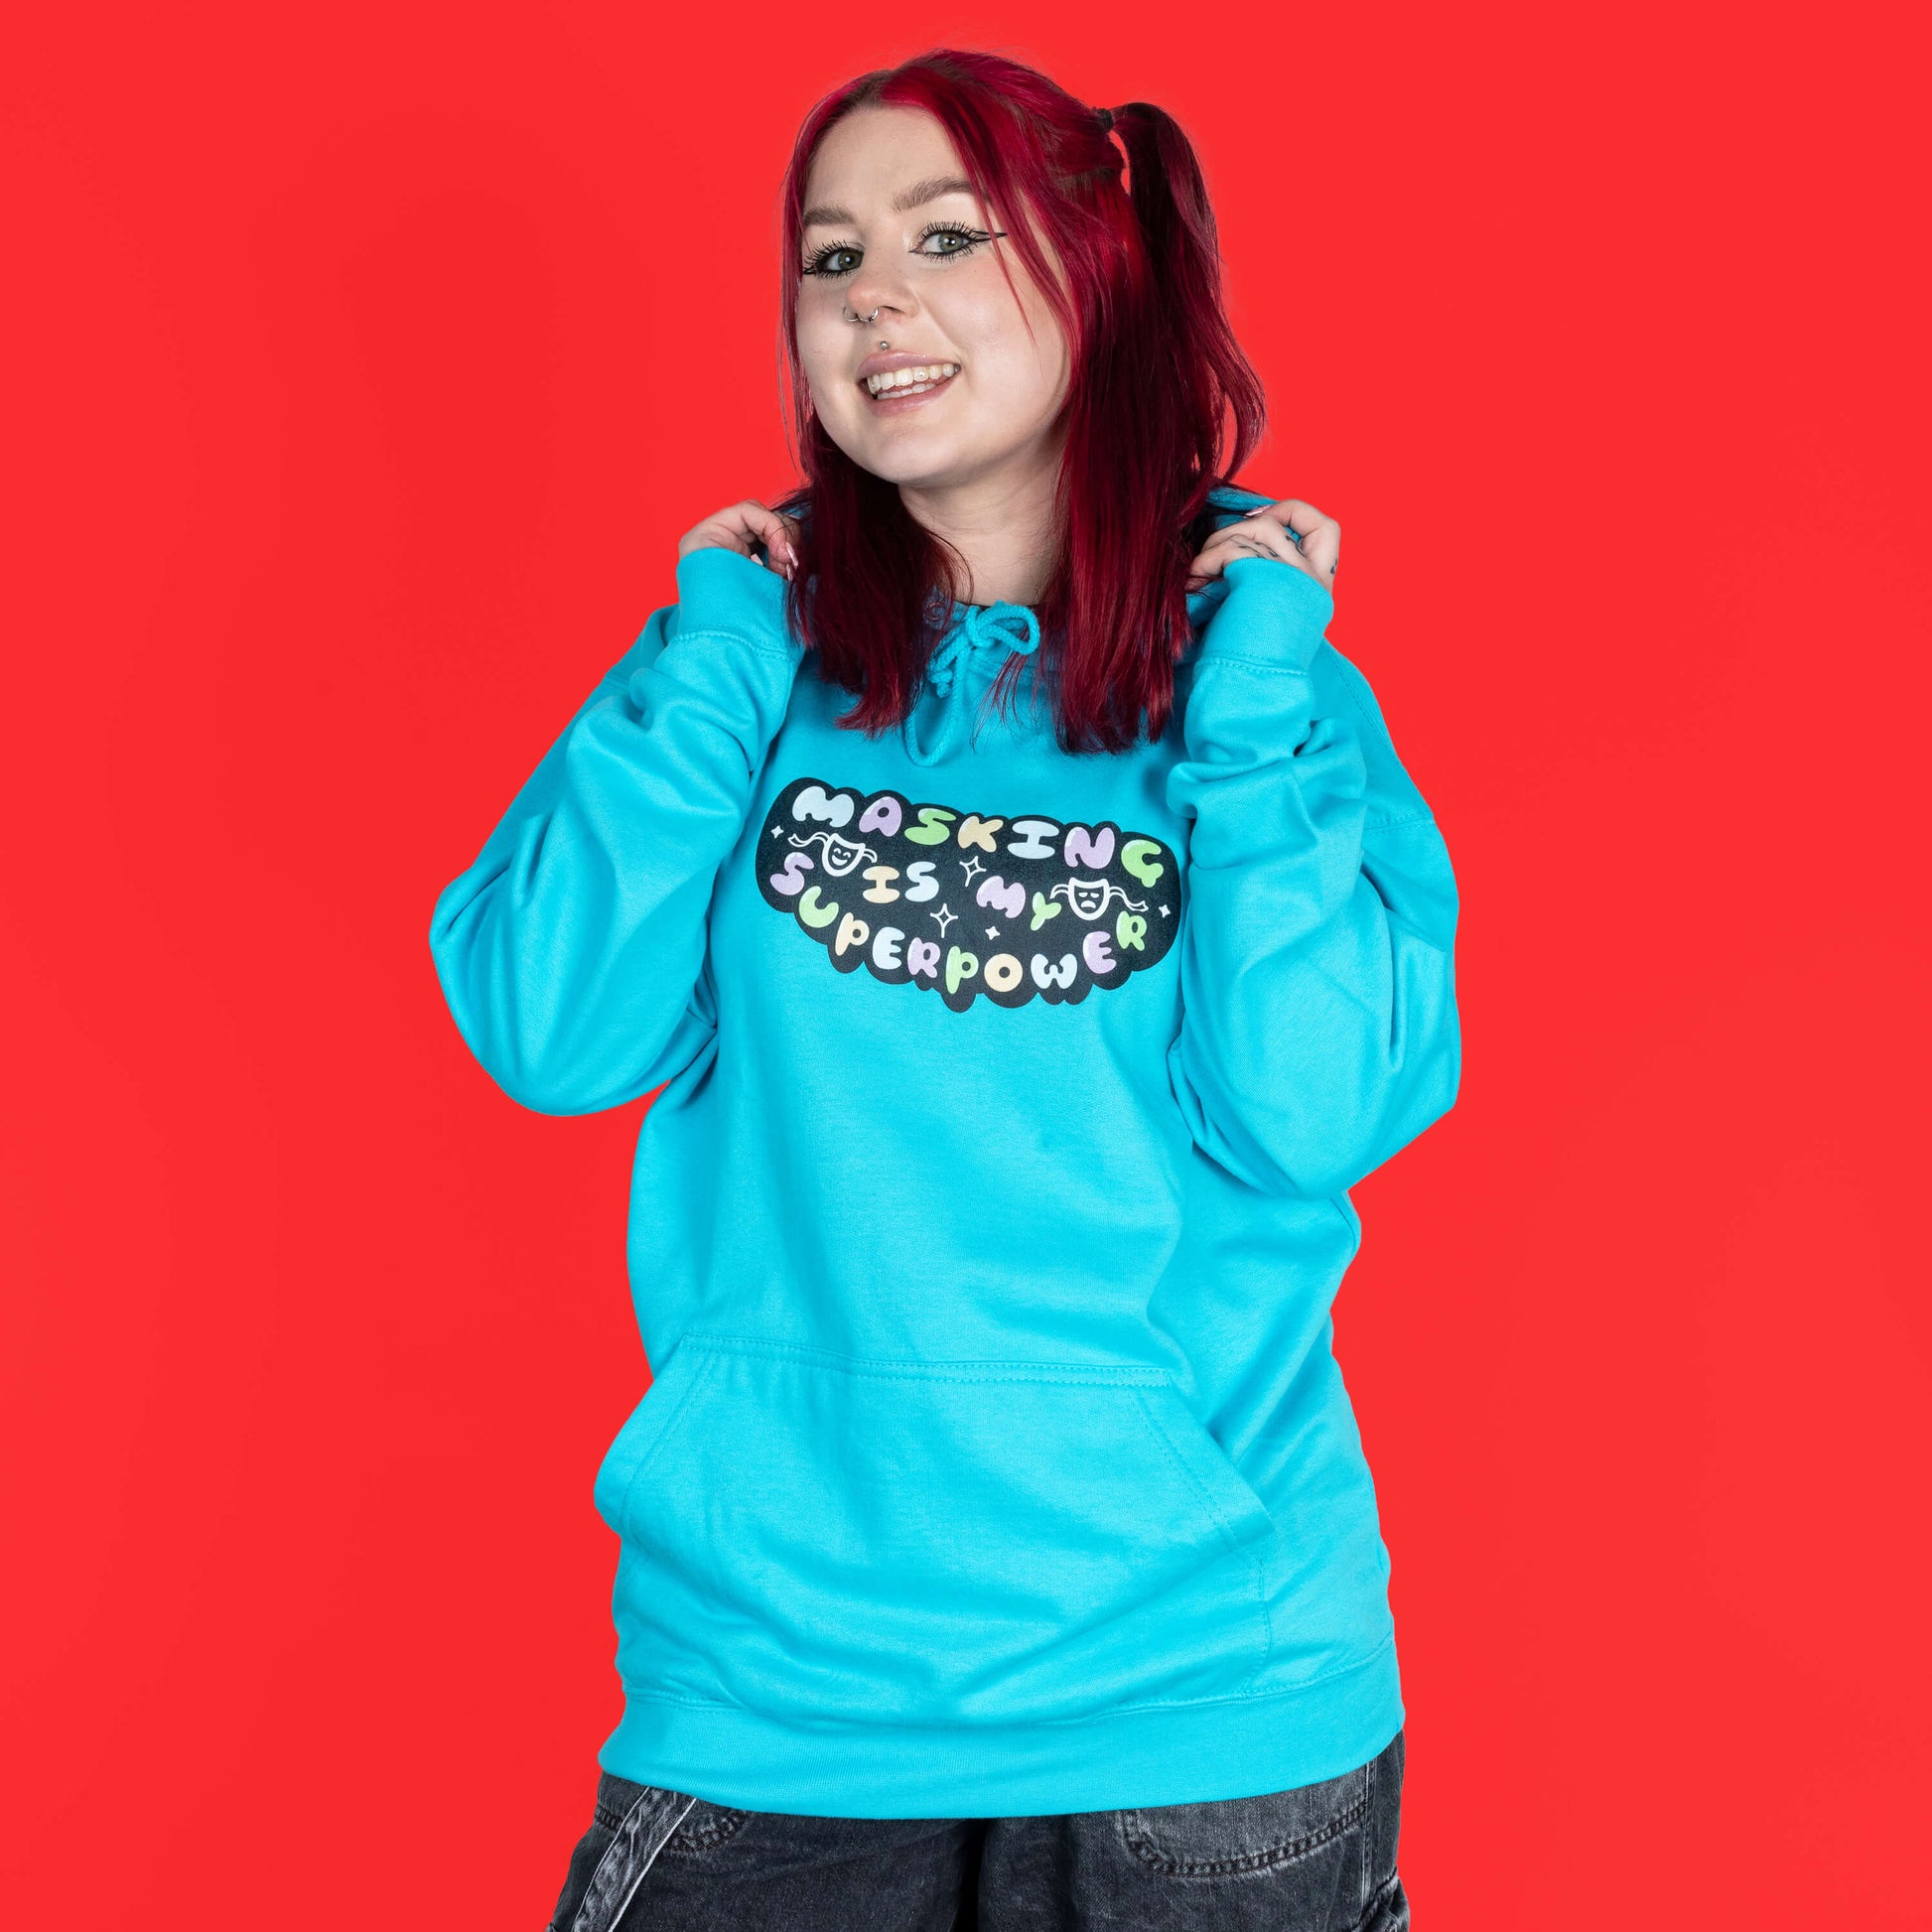 The Masking Is My Super Power Hoodie in Turquoise Surf modelled by Flo with red hair and black eyeliner on a red background. She is facing forward smiling holding the hood. The aqua blue hoodie features pastel rainbow bubble writing that reads 'masking is my superpower' with white sparkles, a happy and sad drama masks all on a black oval. Raising awareness for neurodivergent people with ADHD or Autism.